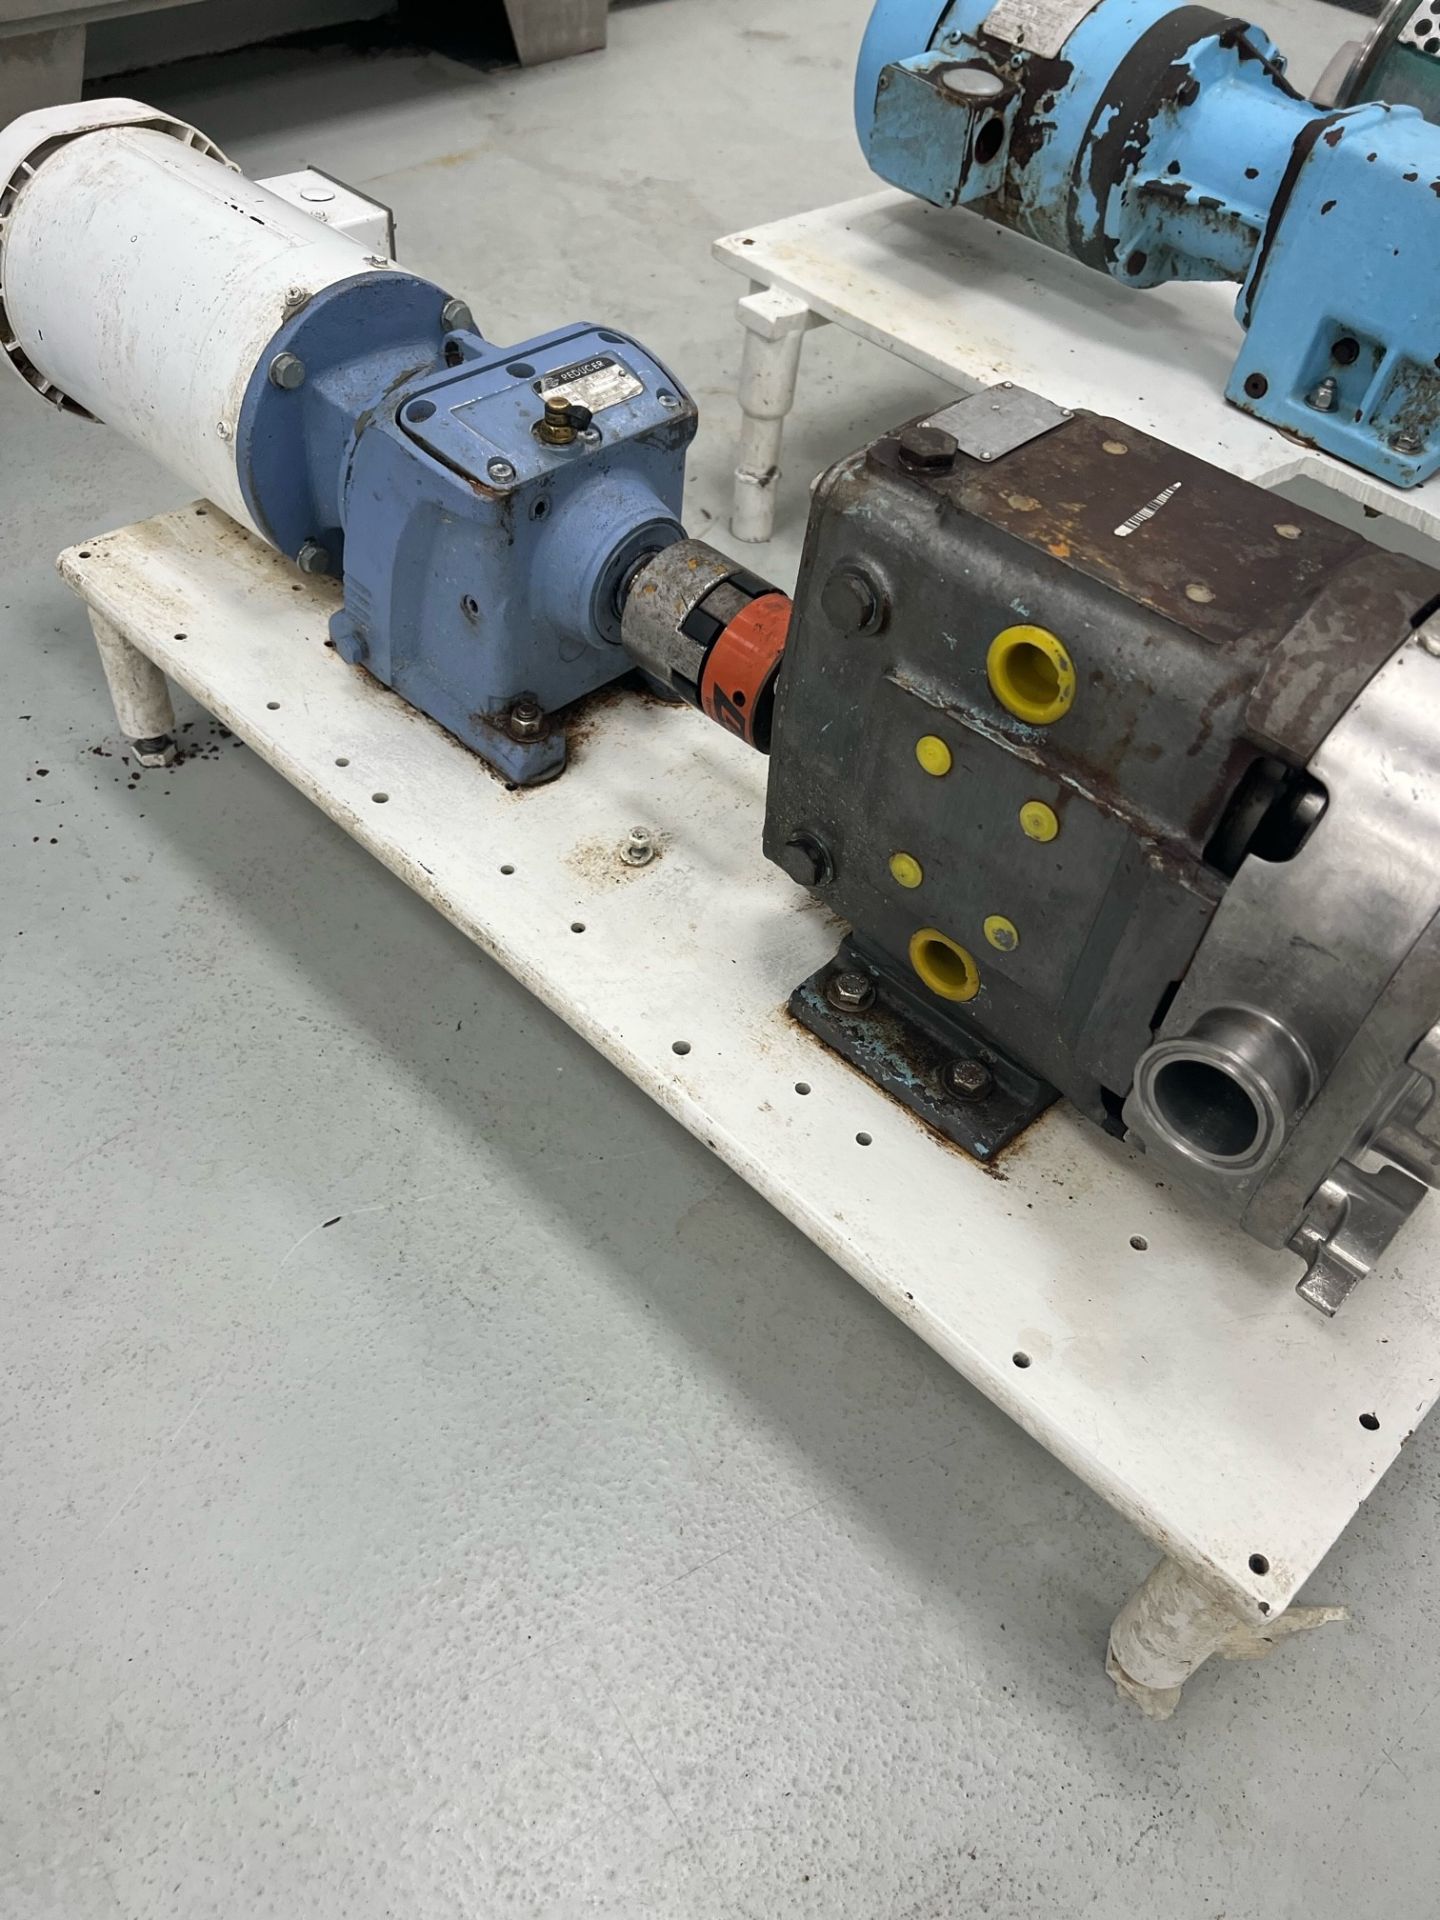 Waukesha M30 Positive Displacement Pump #2 with 2 hp Motor 3 Phase, Brand New, Never Used Since